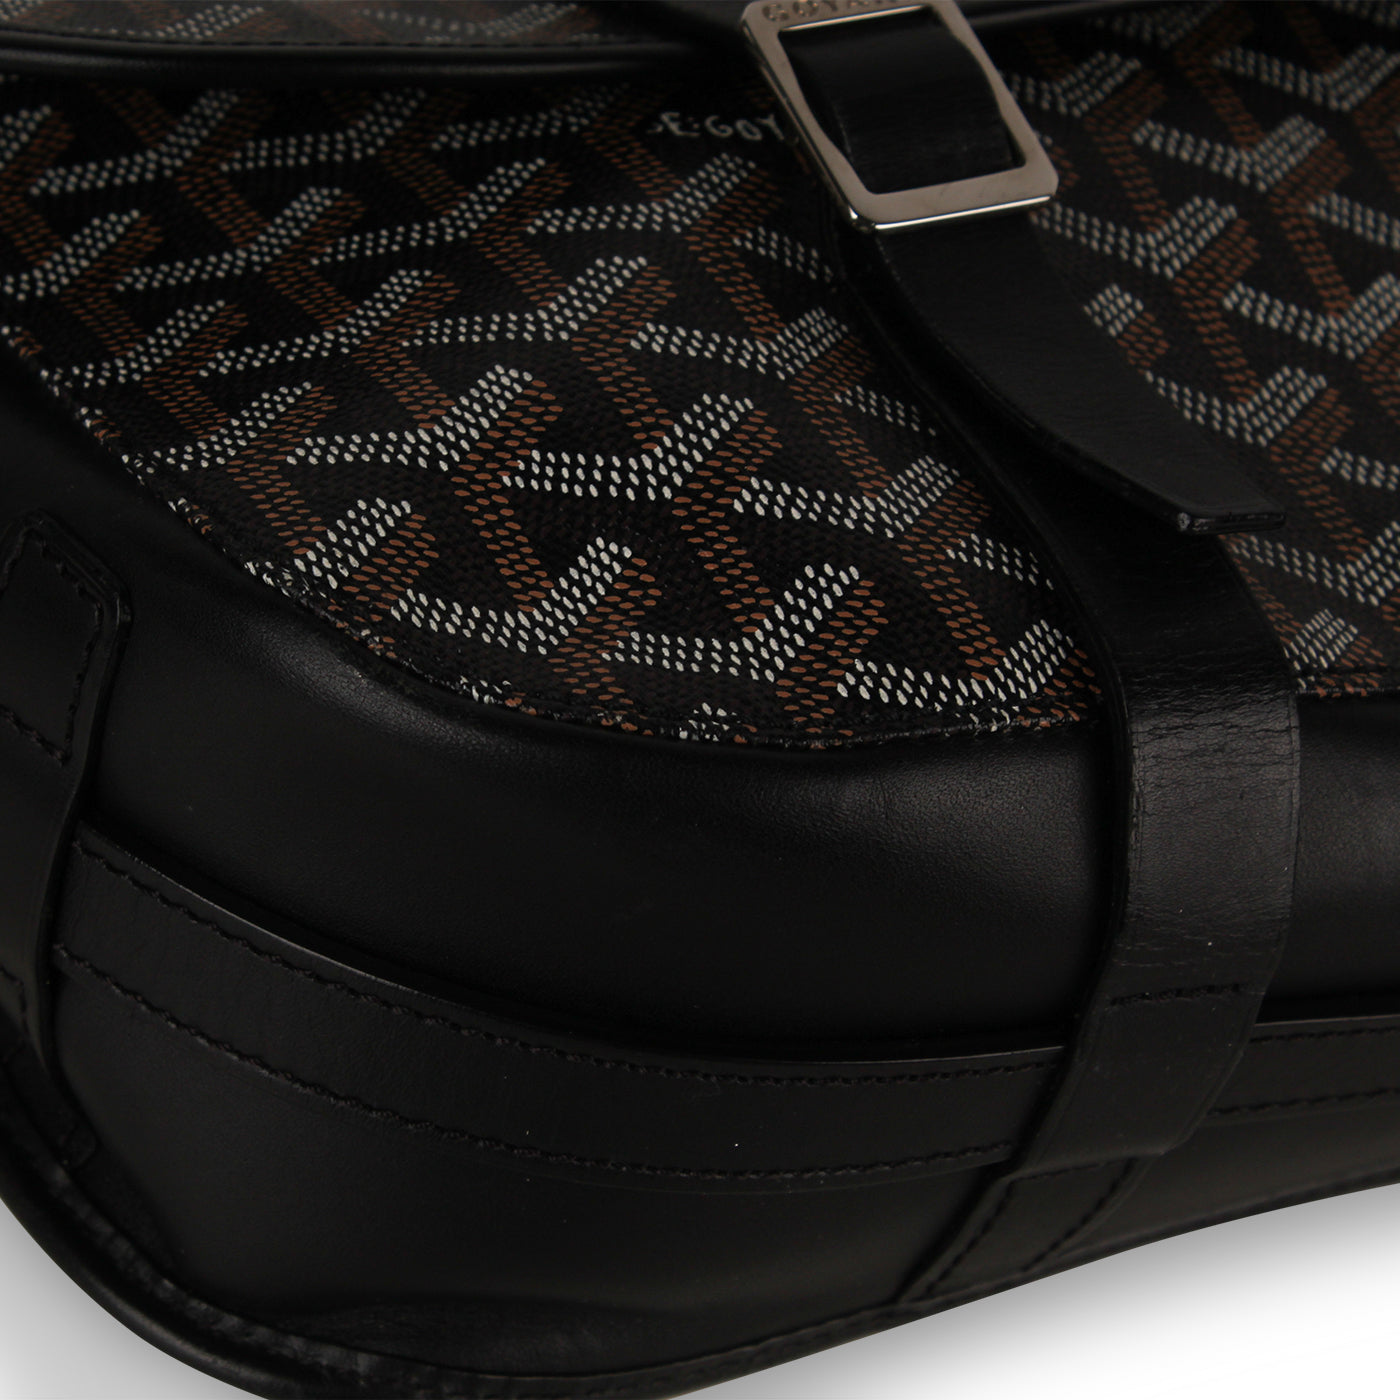 Goyard ของมันต้องมี #Belvedere, Gallery posted by chilloutnorest